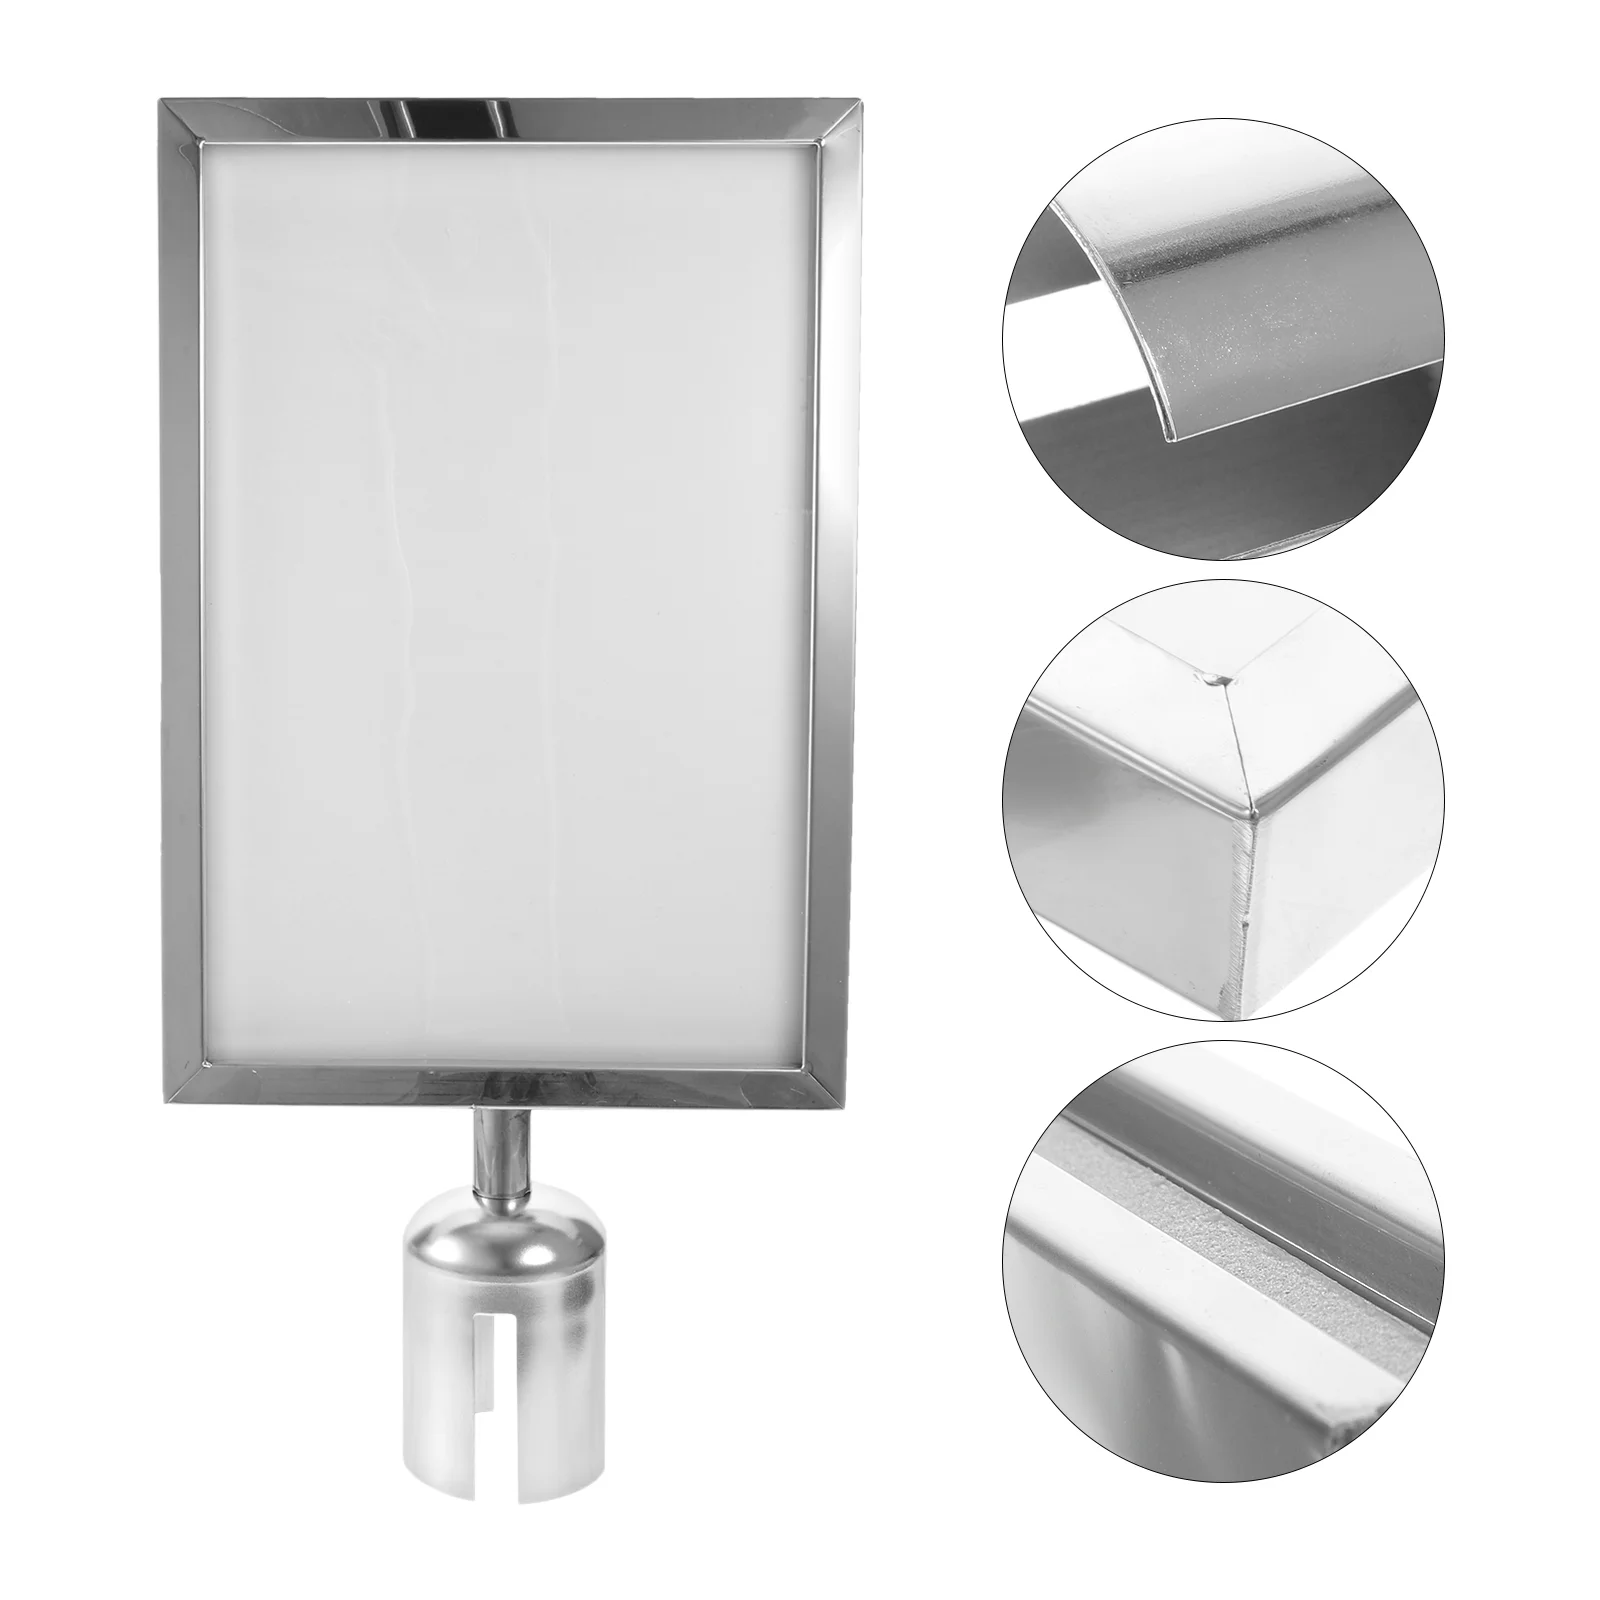 

Portrait Top Stand Vertical Stanchion Sign Holder Retractable Belt Stanchions Queue Barrier Stainless Steel Small